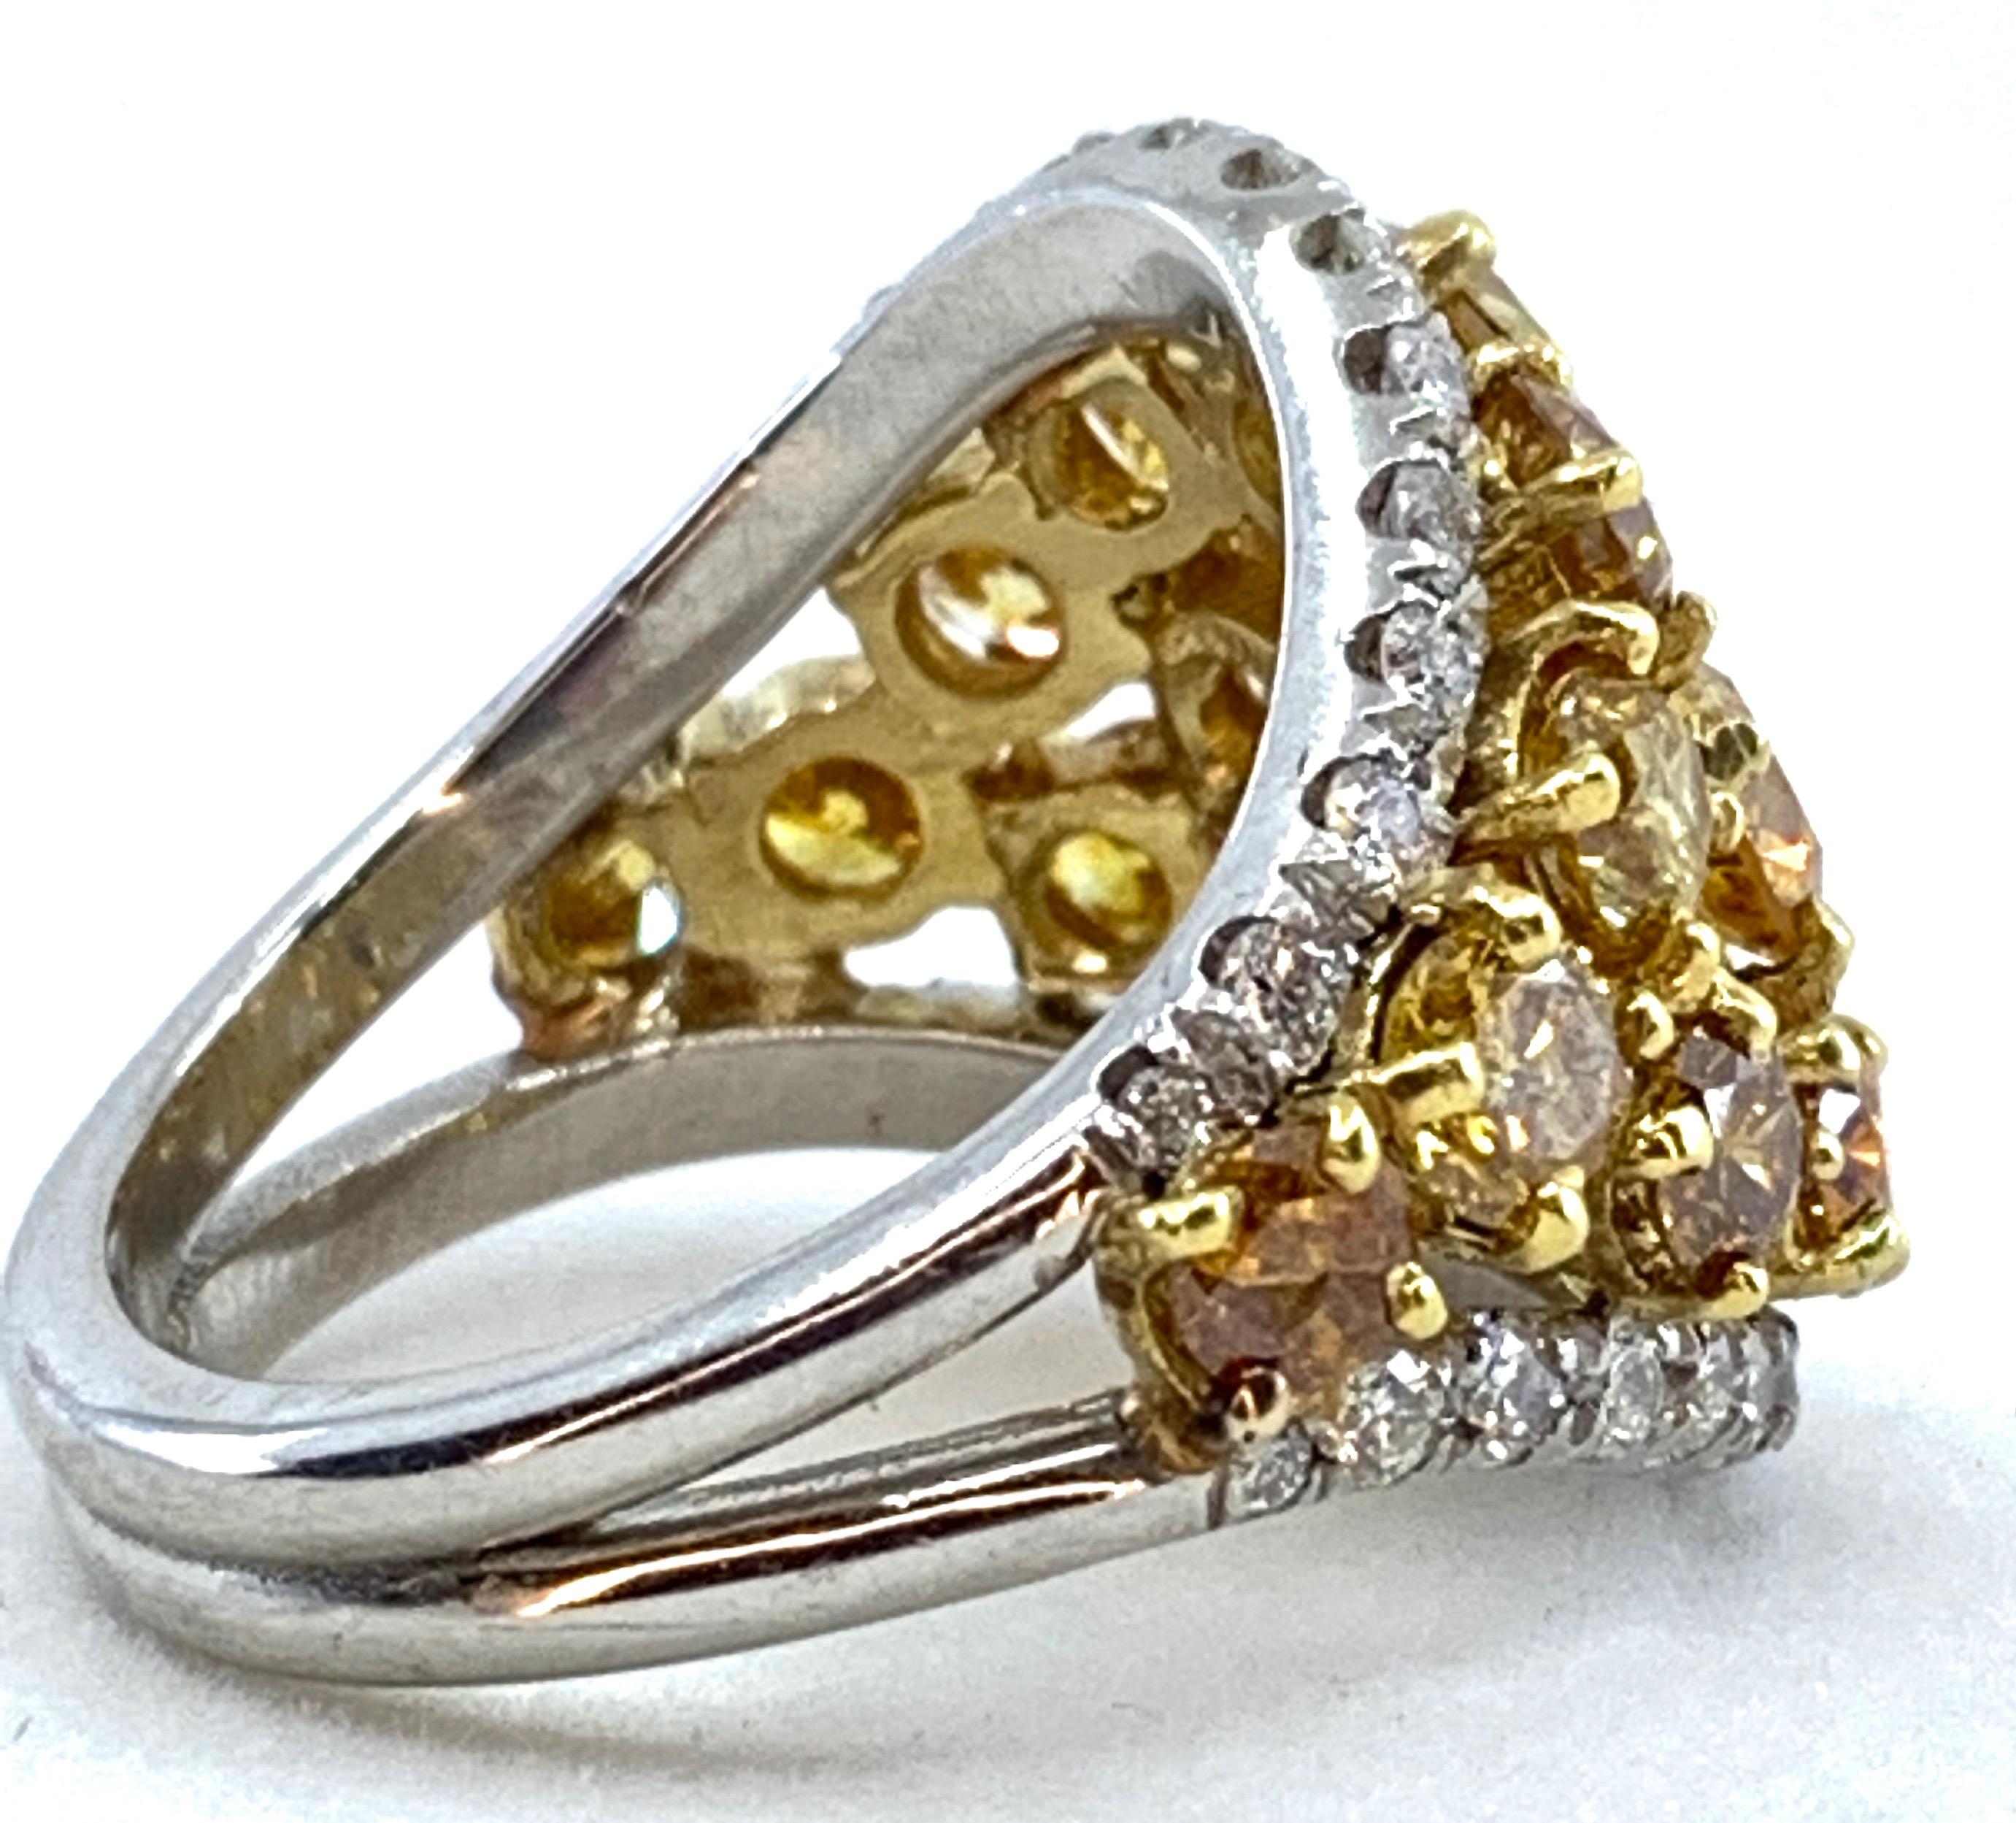 4.6 Carat Natural Yellow Diamond Shield Ring in Platinum and 18 Karat Yellow Gol In New Condition For Sale In Sherman Oaks, CA